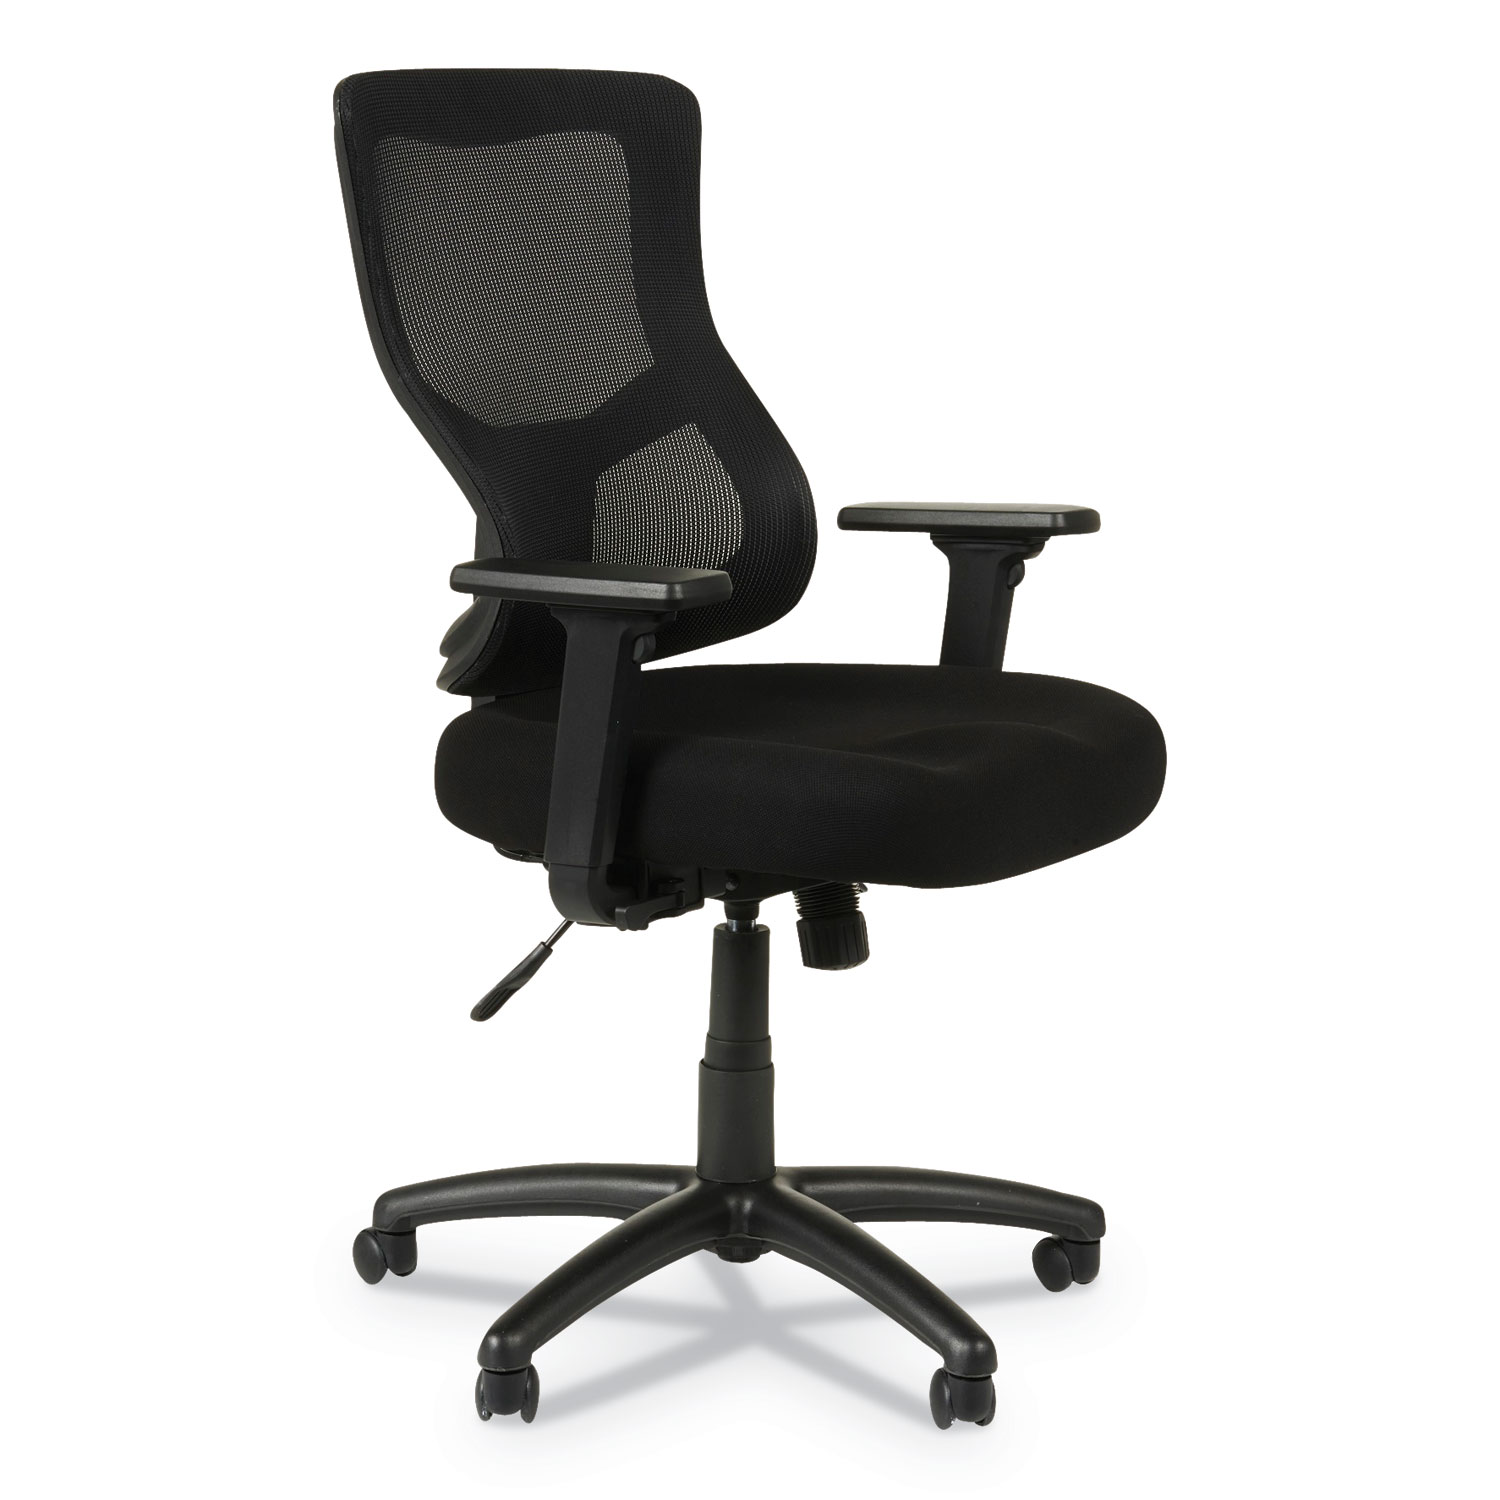  Alera ALEELT4214S Alera Elusion II Series Mesh Mid-Back Synchro with Seat Slide Chair, Supports up to 275 lbs., Black Seat/Back, Black Base (ALEELT4214S) 